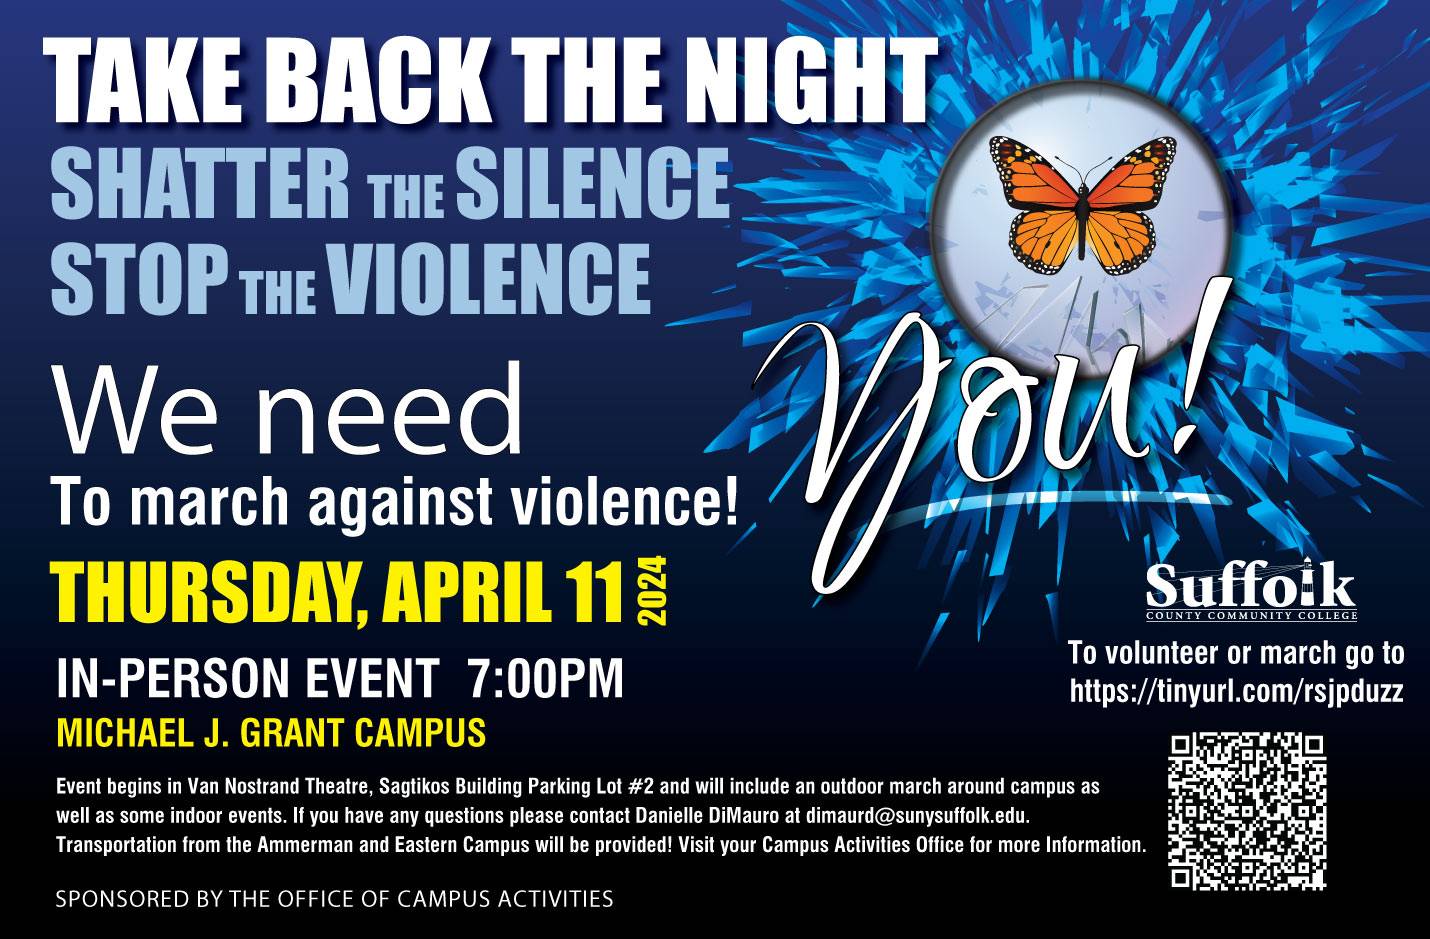 Take Back the Night, Shatter the Silence Stop the violence march, Thursday April 11, 2024 7 pm at the Michael J. Grant Campus. To volunteer or march go to https://tinyurl.com/rsjpduzz